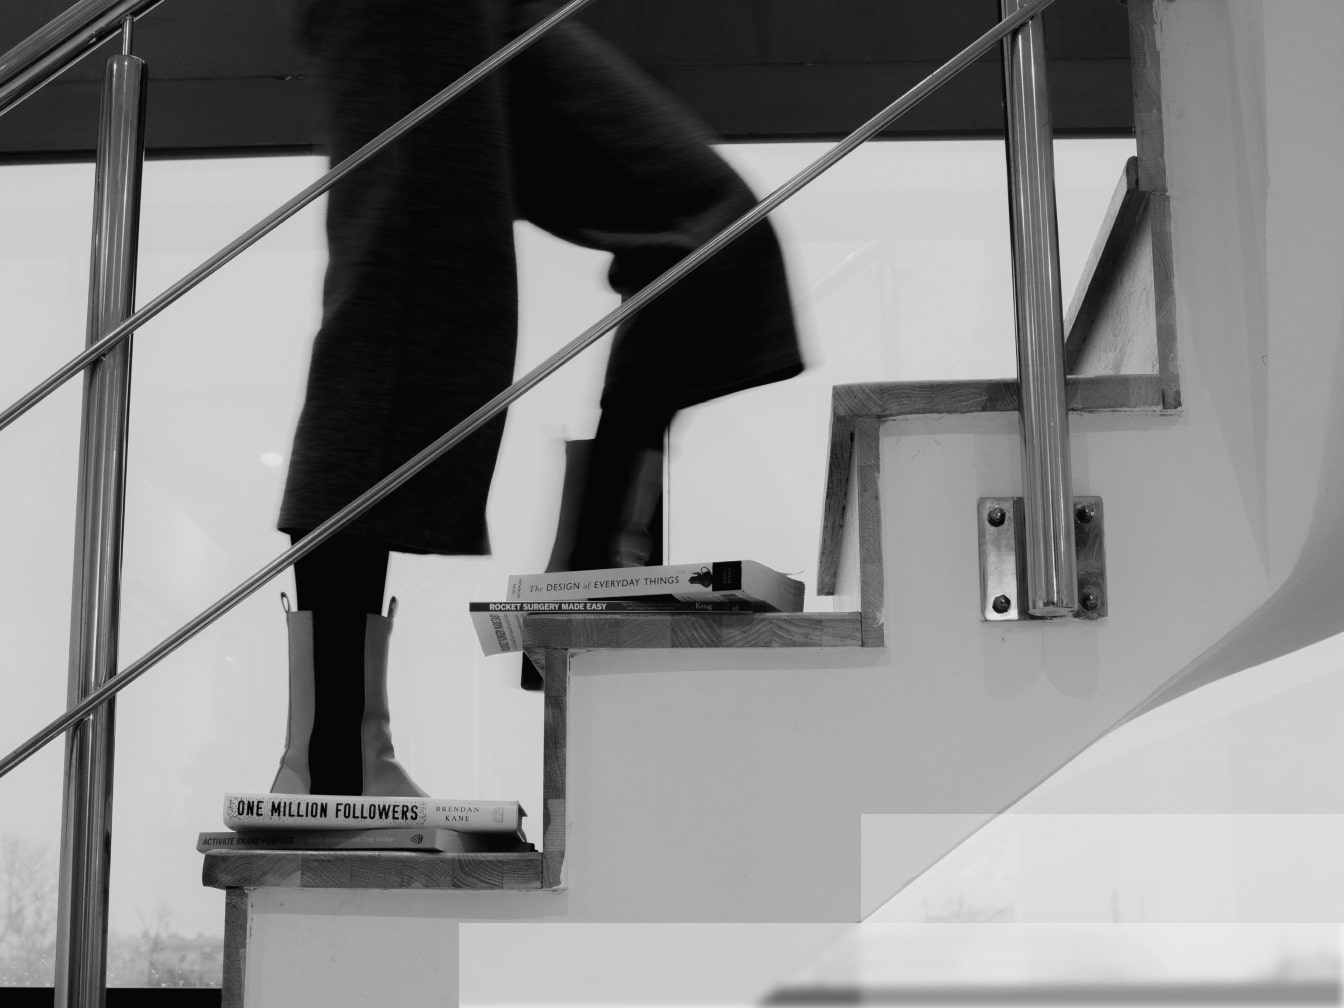 A woman climbing stairs with 4 books on steps, her legs visible in motion.